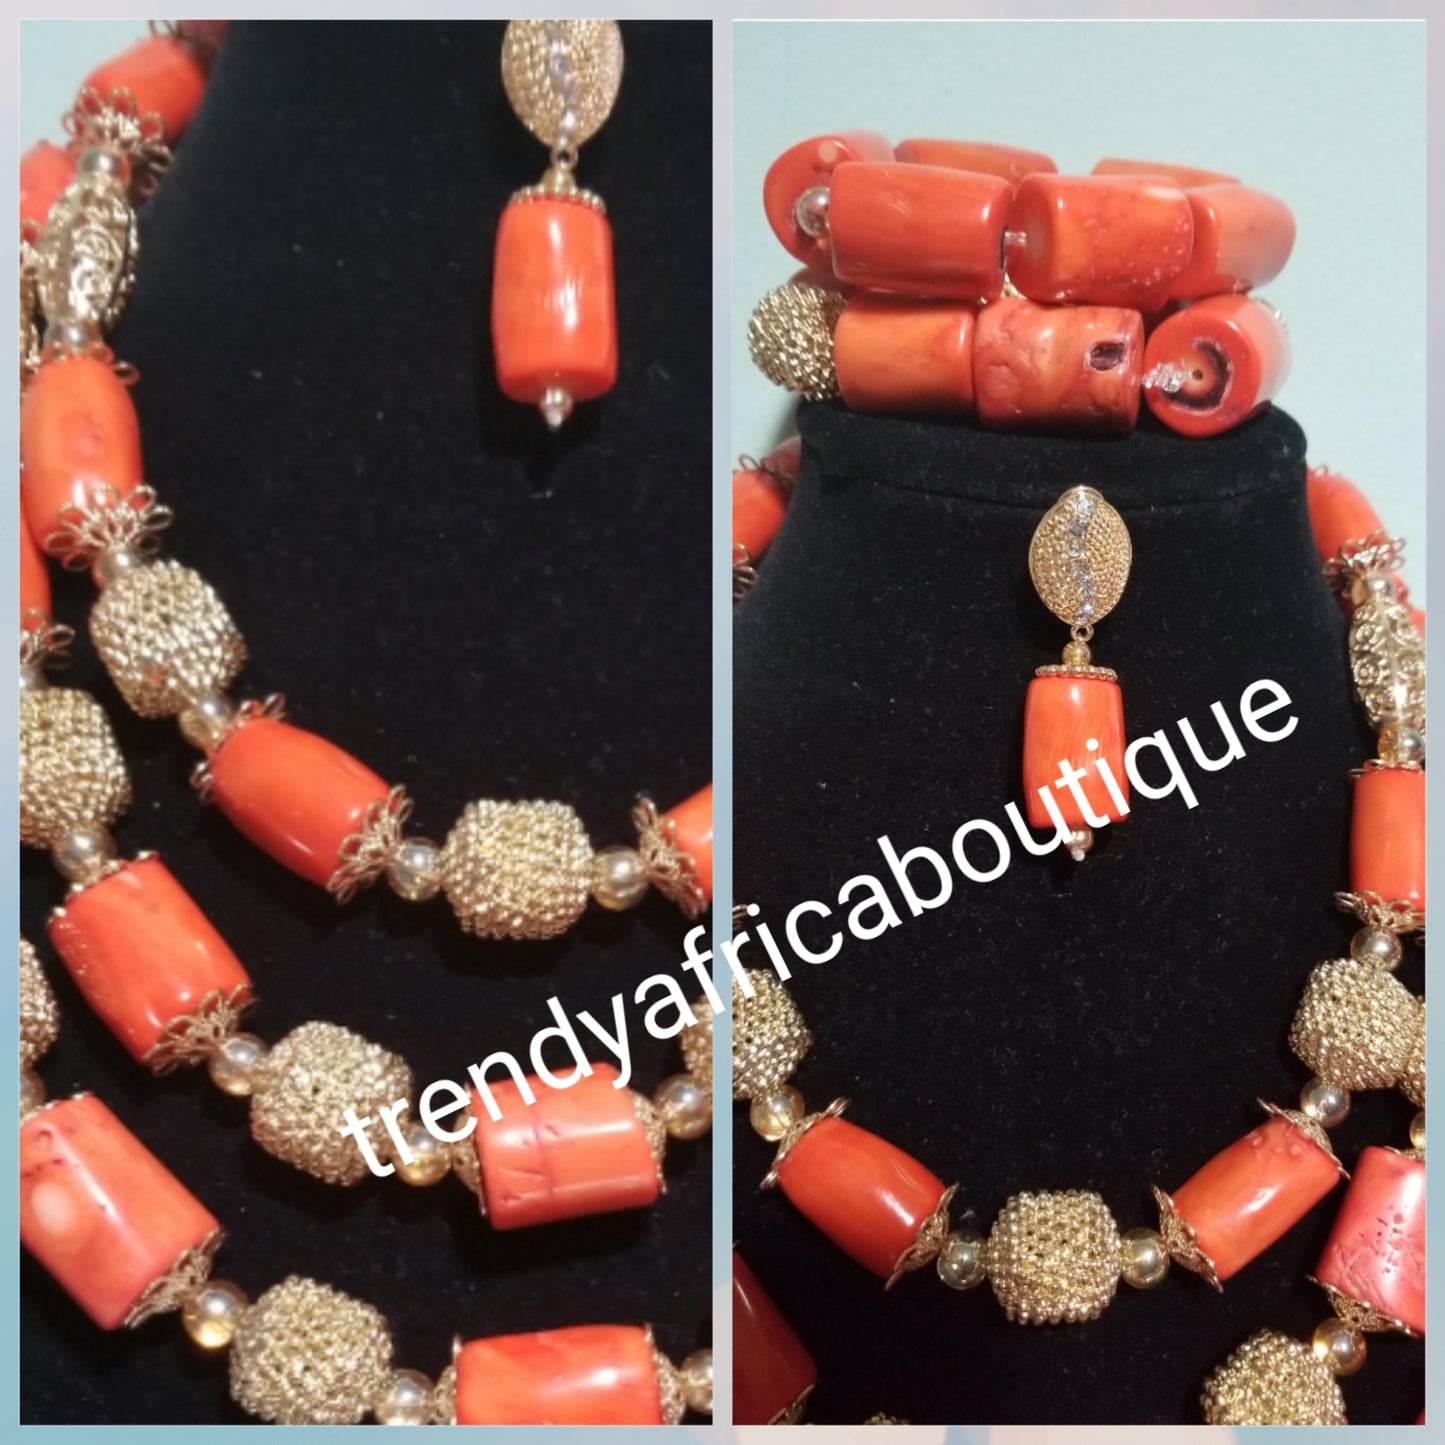 Back in stock: Original Edo /Nigerian coral Beaded-necklace set. 3pcs set of bridal wedding accessories beads latest design with beads stones